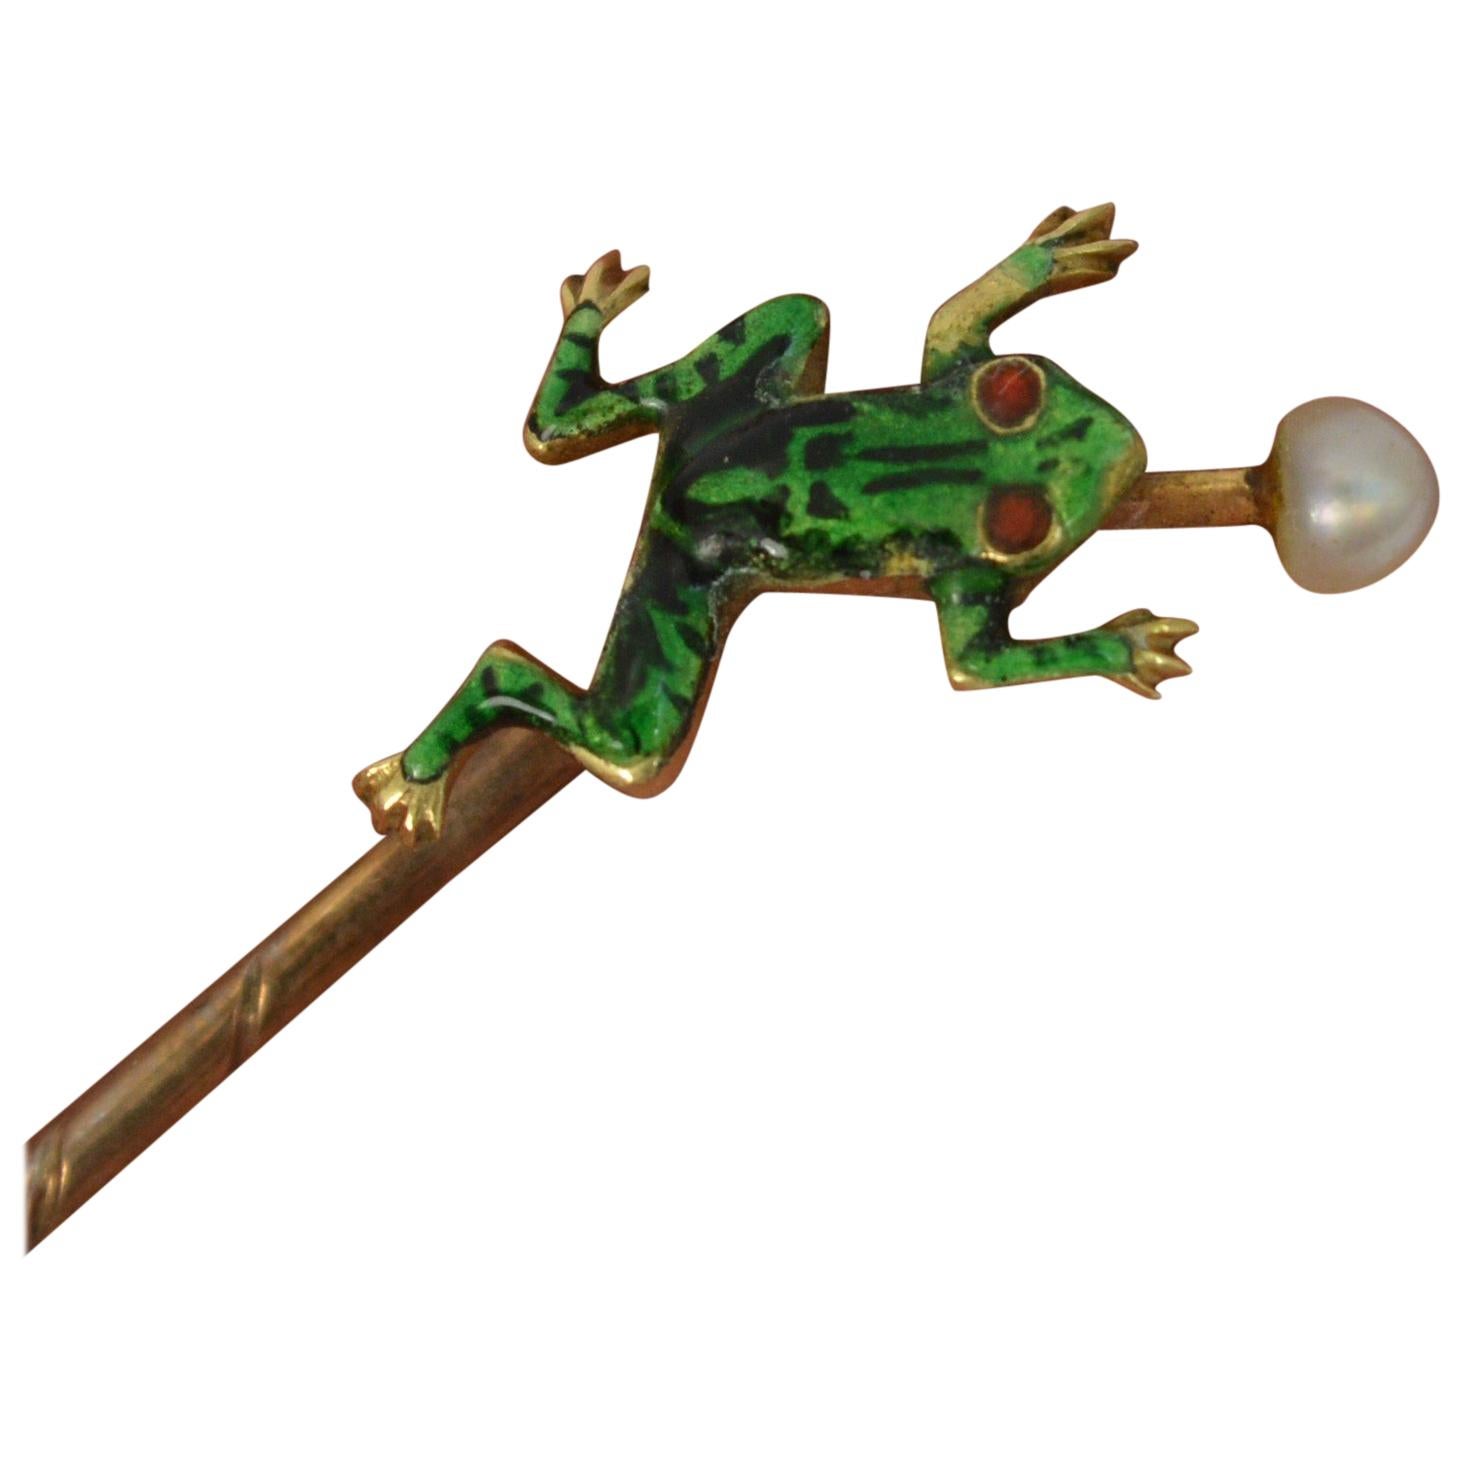 Novelty Victorian Frog Enamel 9 Carat Gold Stick Pin in Antique Box Dated 1915